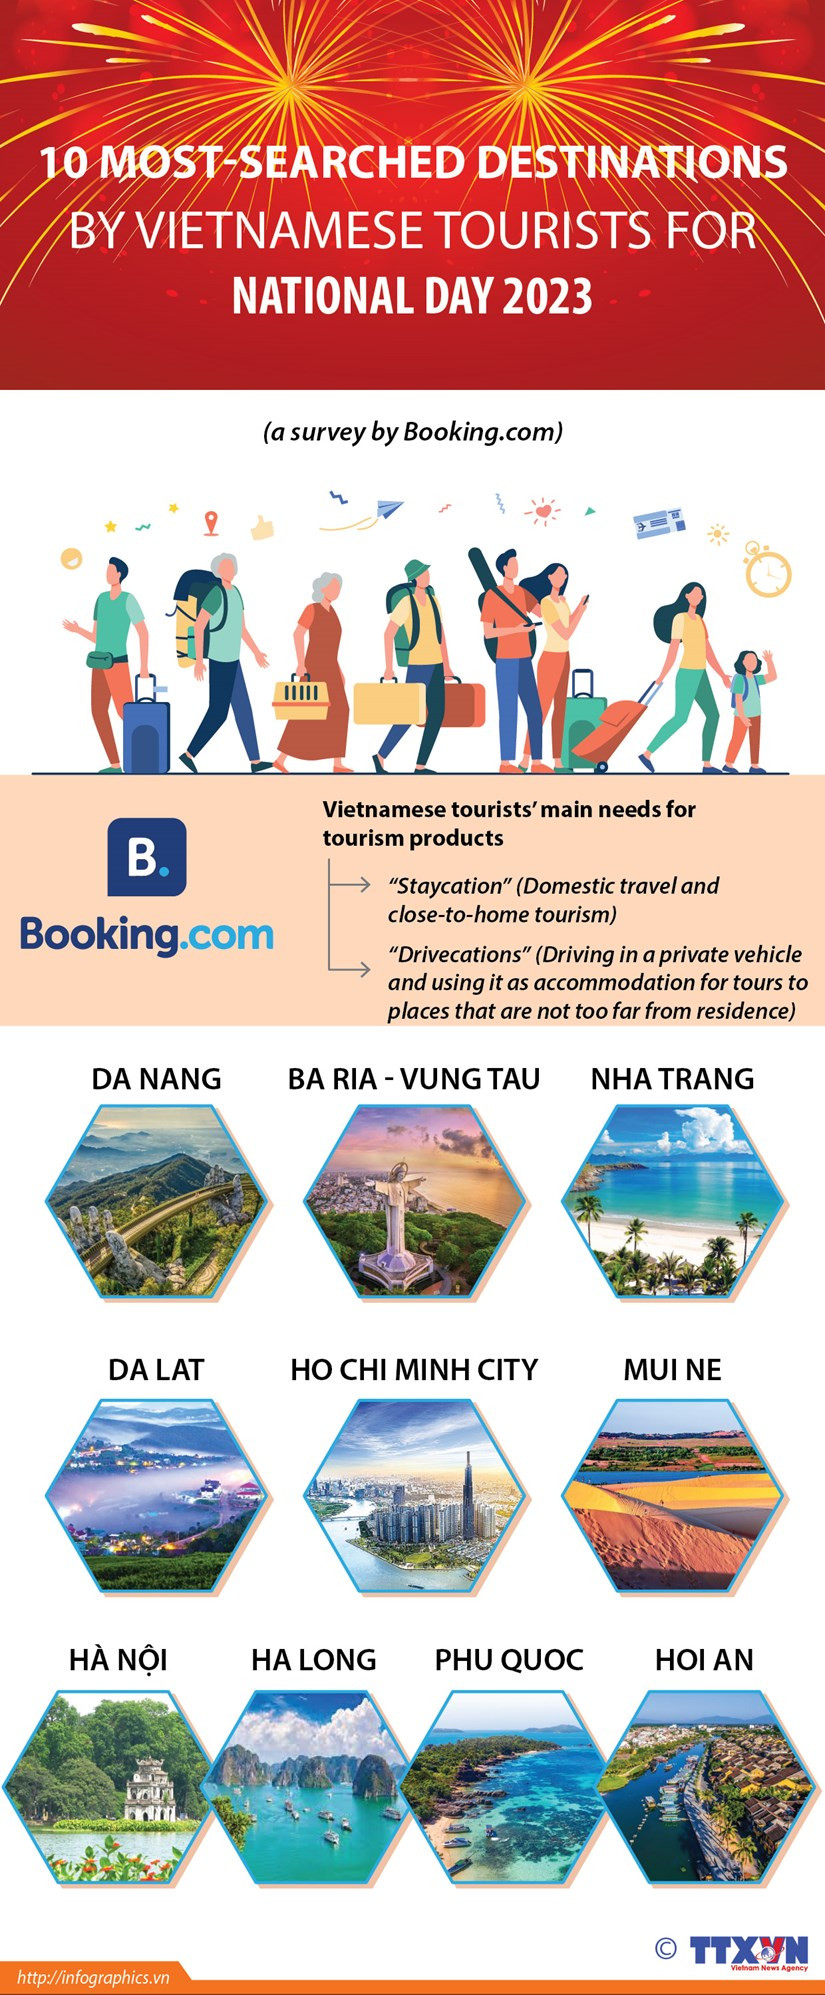 10 most-searched destinations by Vietnamese tourists for National Day 2023 hinh anh 1